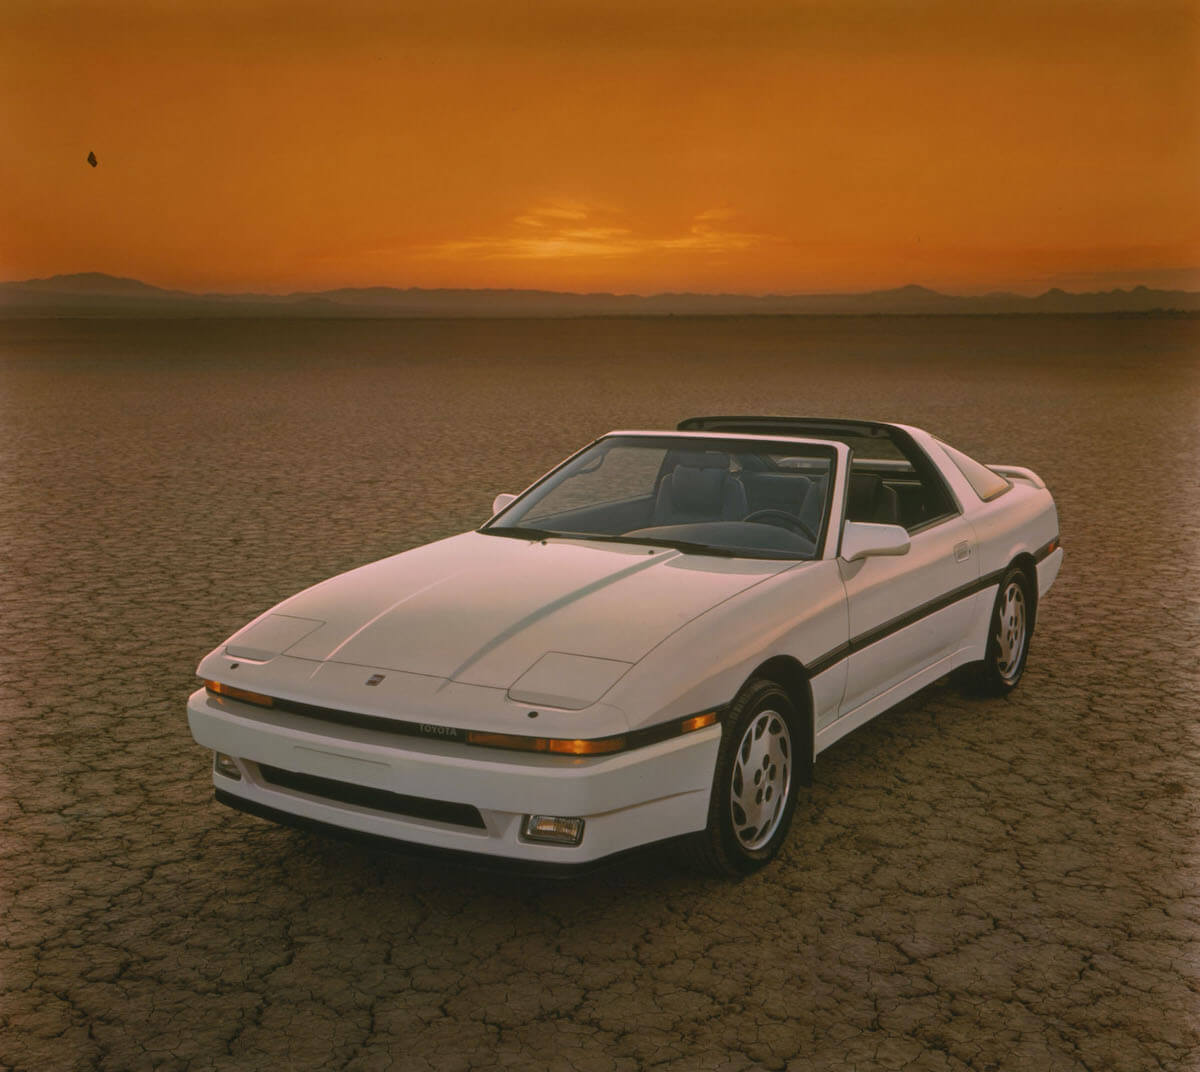 A front view of a white 1987 Toyota Supra